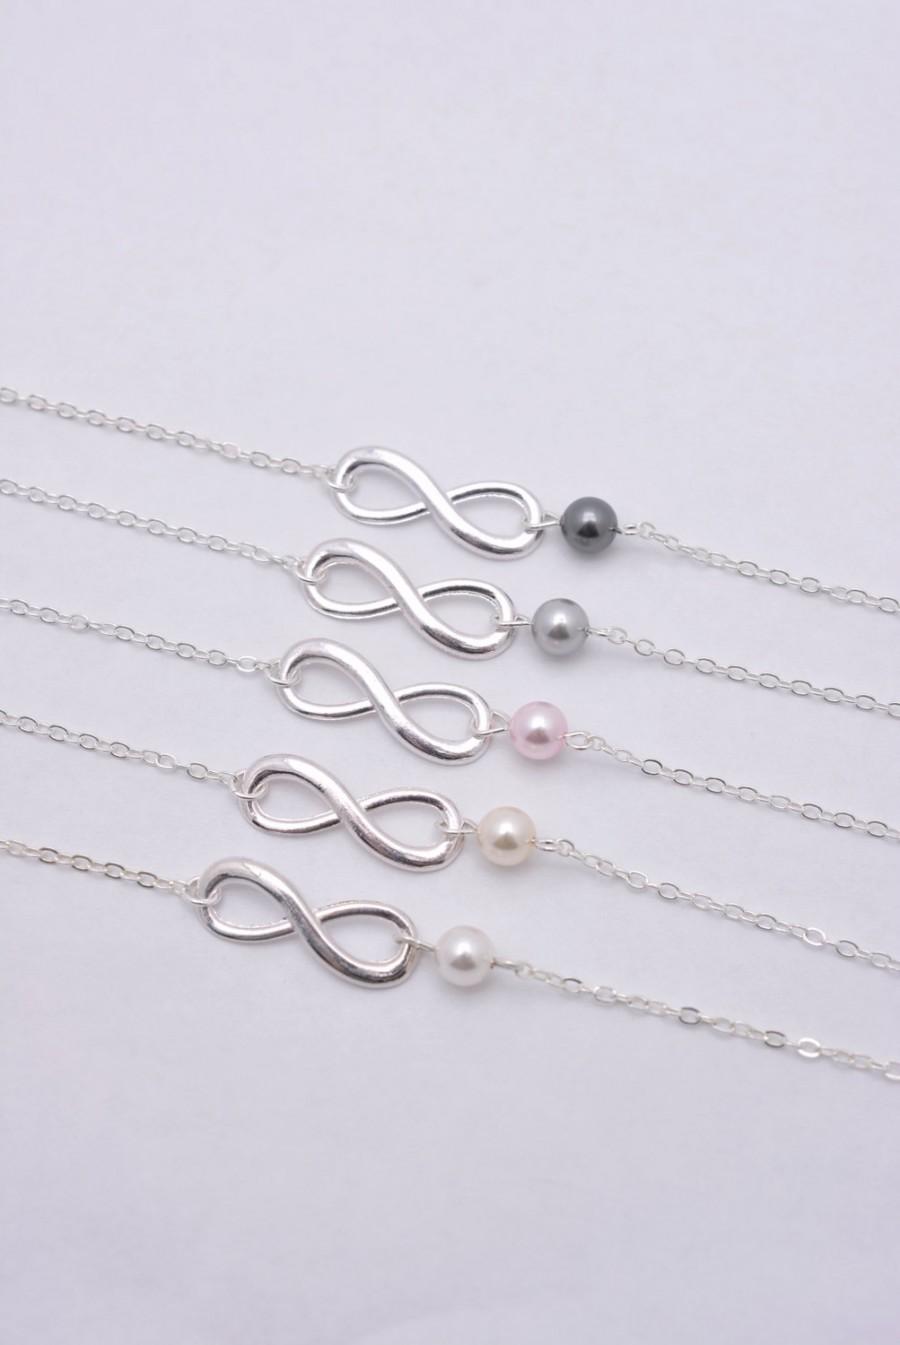 Wedding - Set of 4 Bridesmaid Infinity Bracelets, Infinity Pearl Bracelets, 4 Infinity and Pearl Bracelets - Sterling Silver Chain 0217